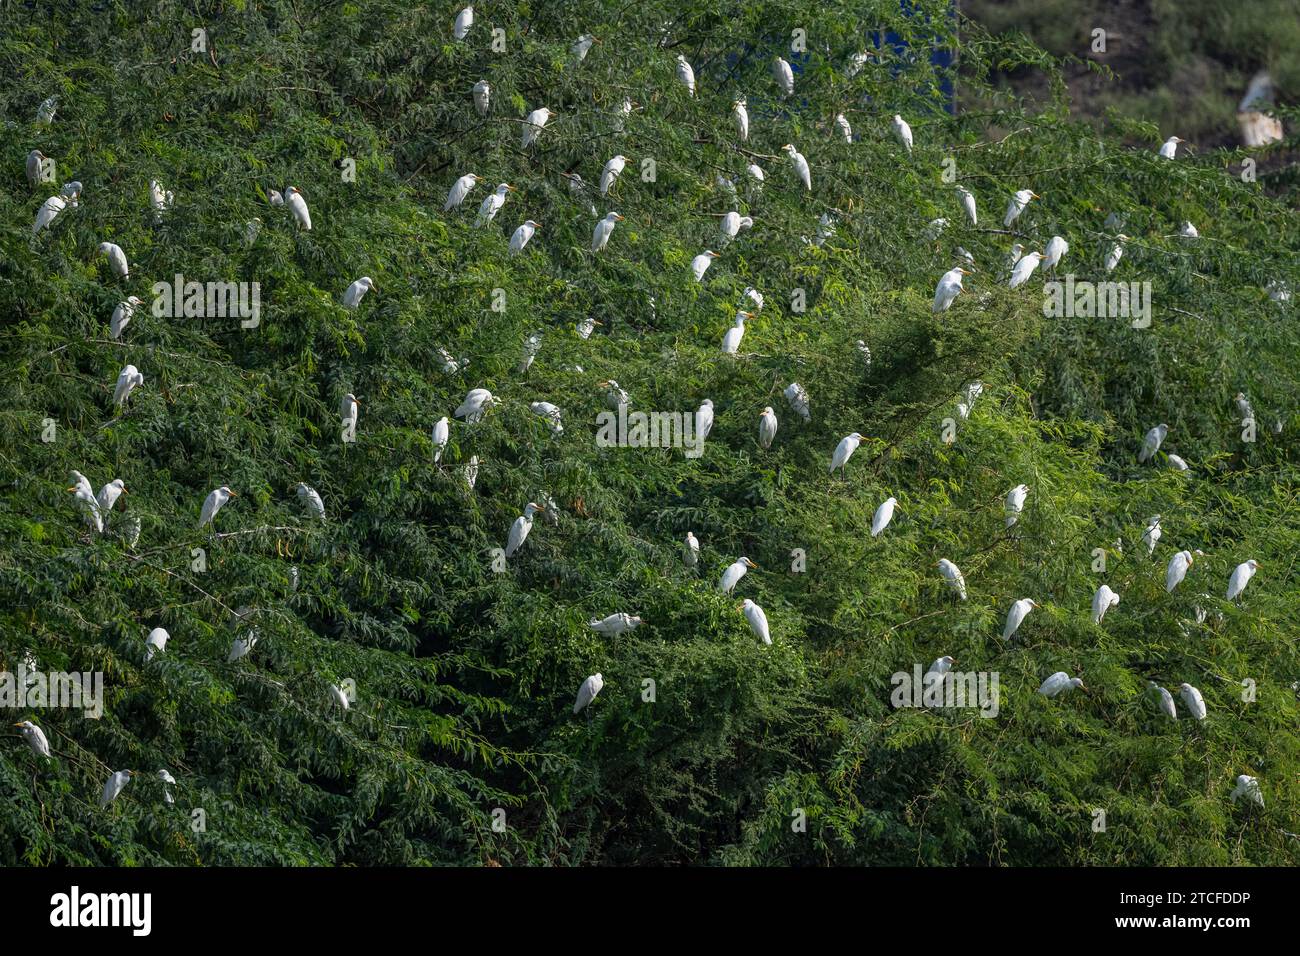 Colorful background with an exotic bird. Large flock of birds in the trees. Cattle Egret, Bubulcus ibis. Stock Photo